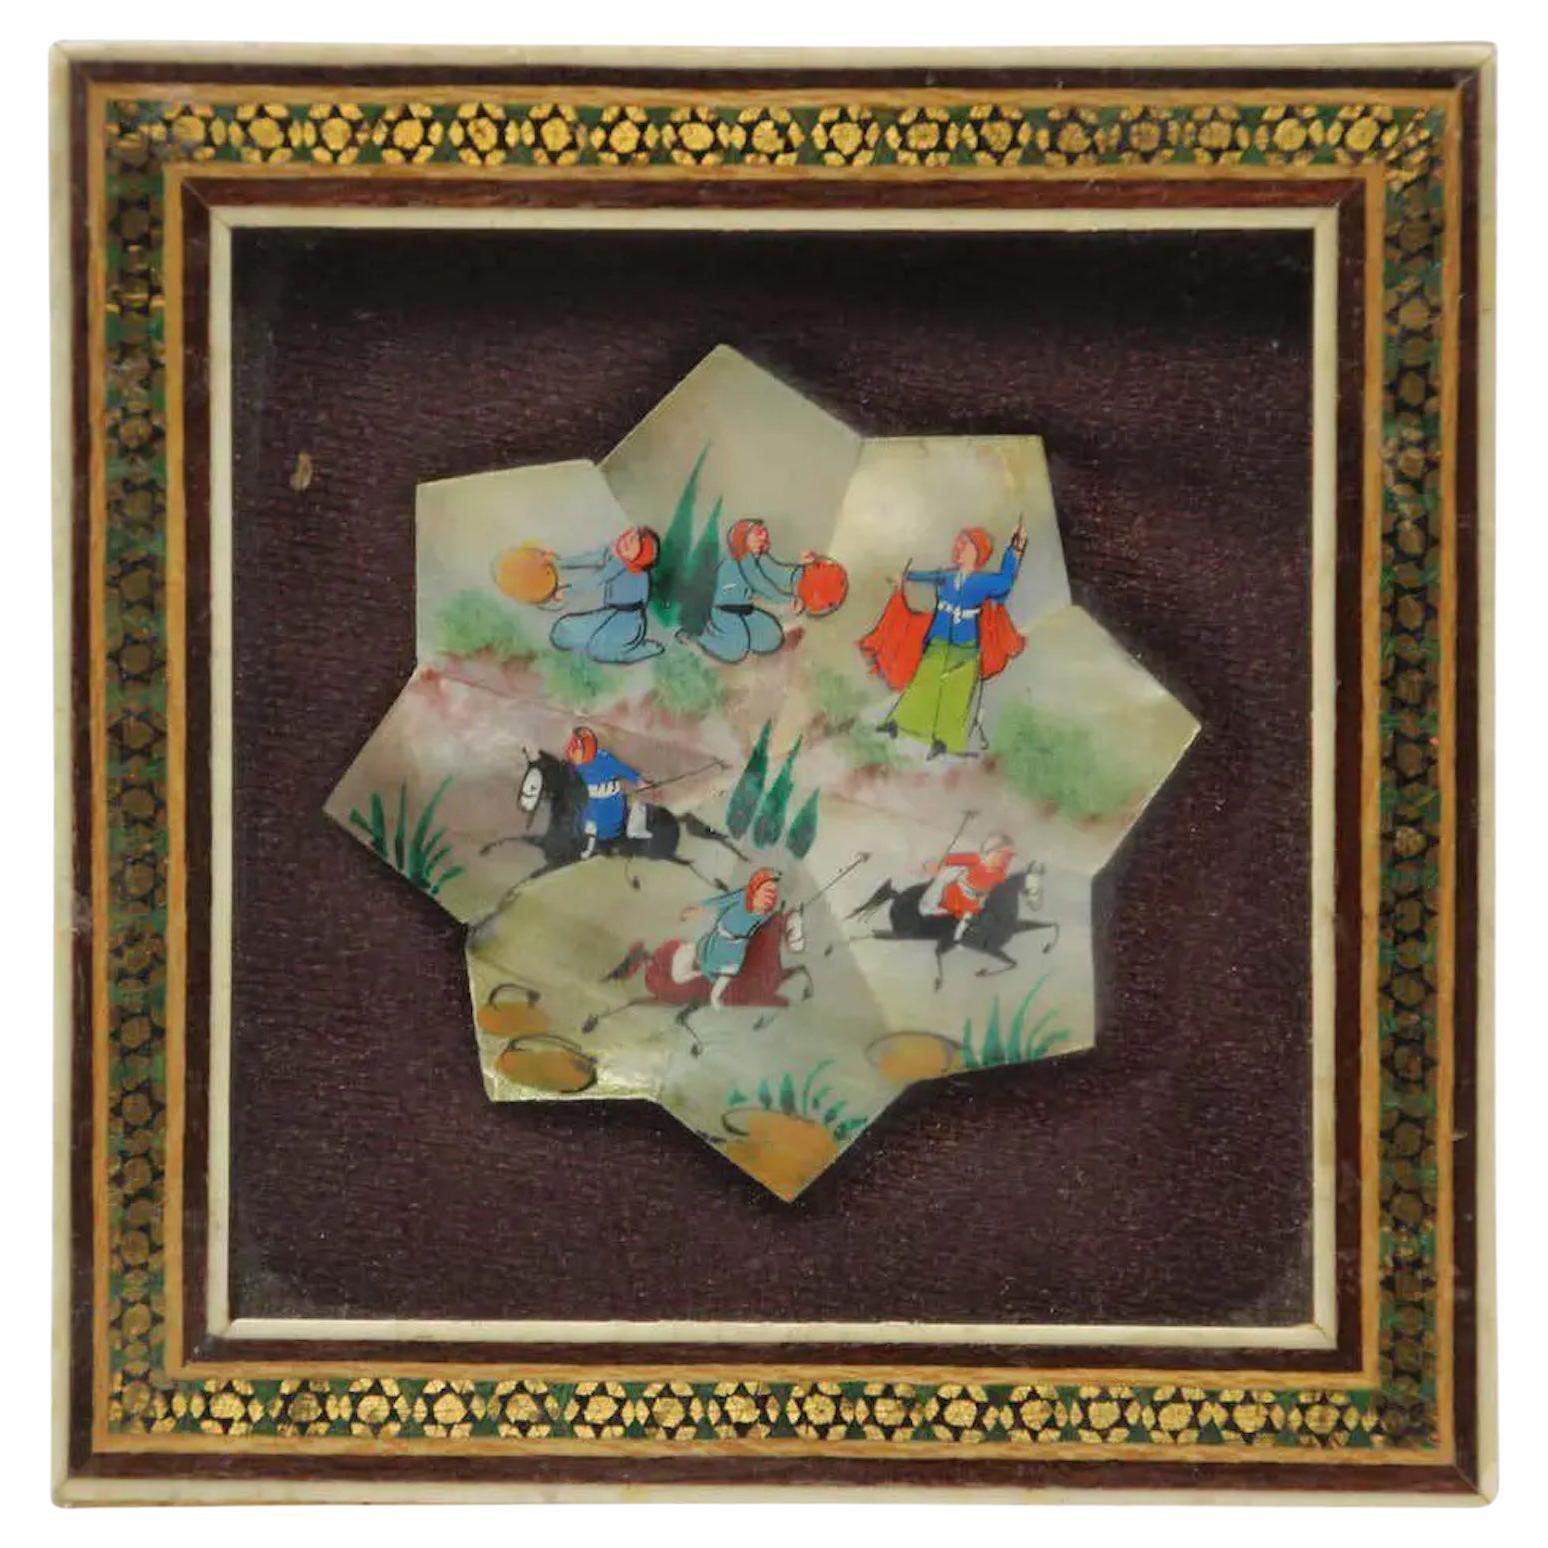 Framed Middle Eastern Miniature Painting on Shell